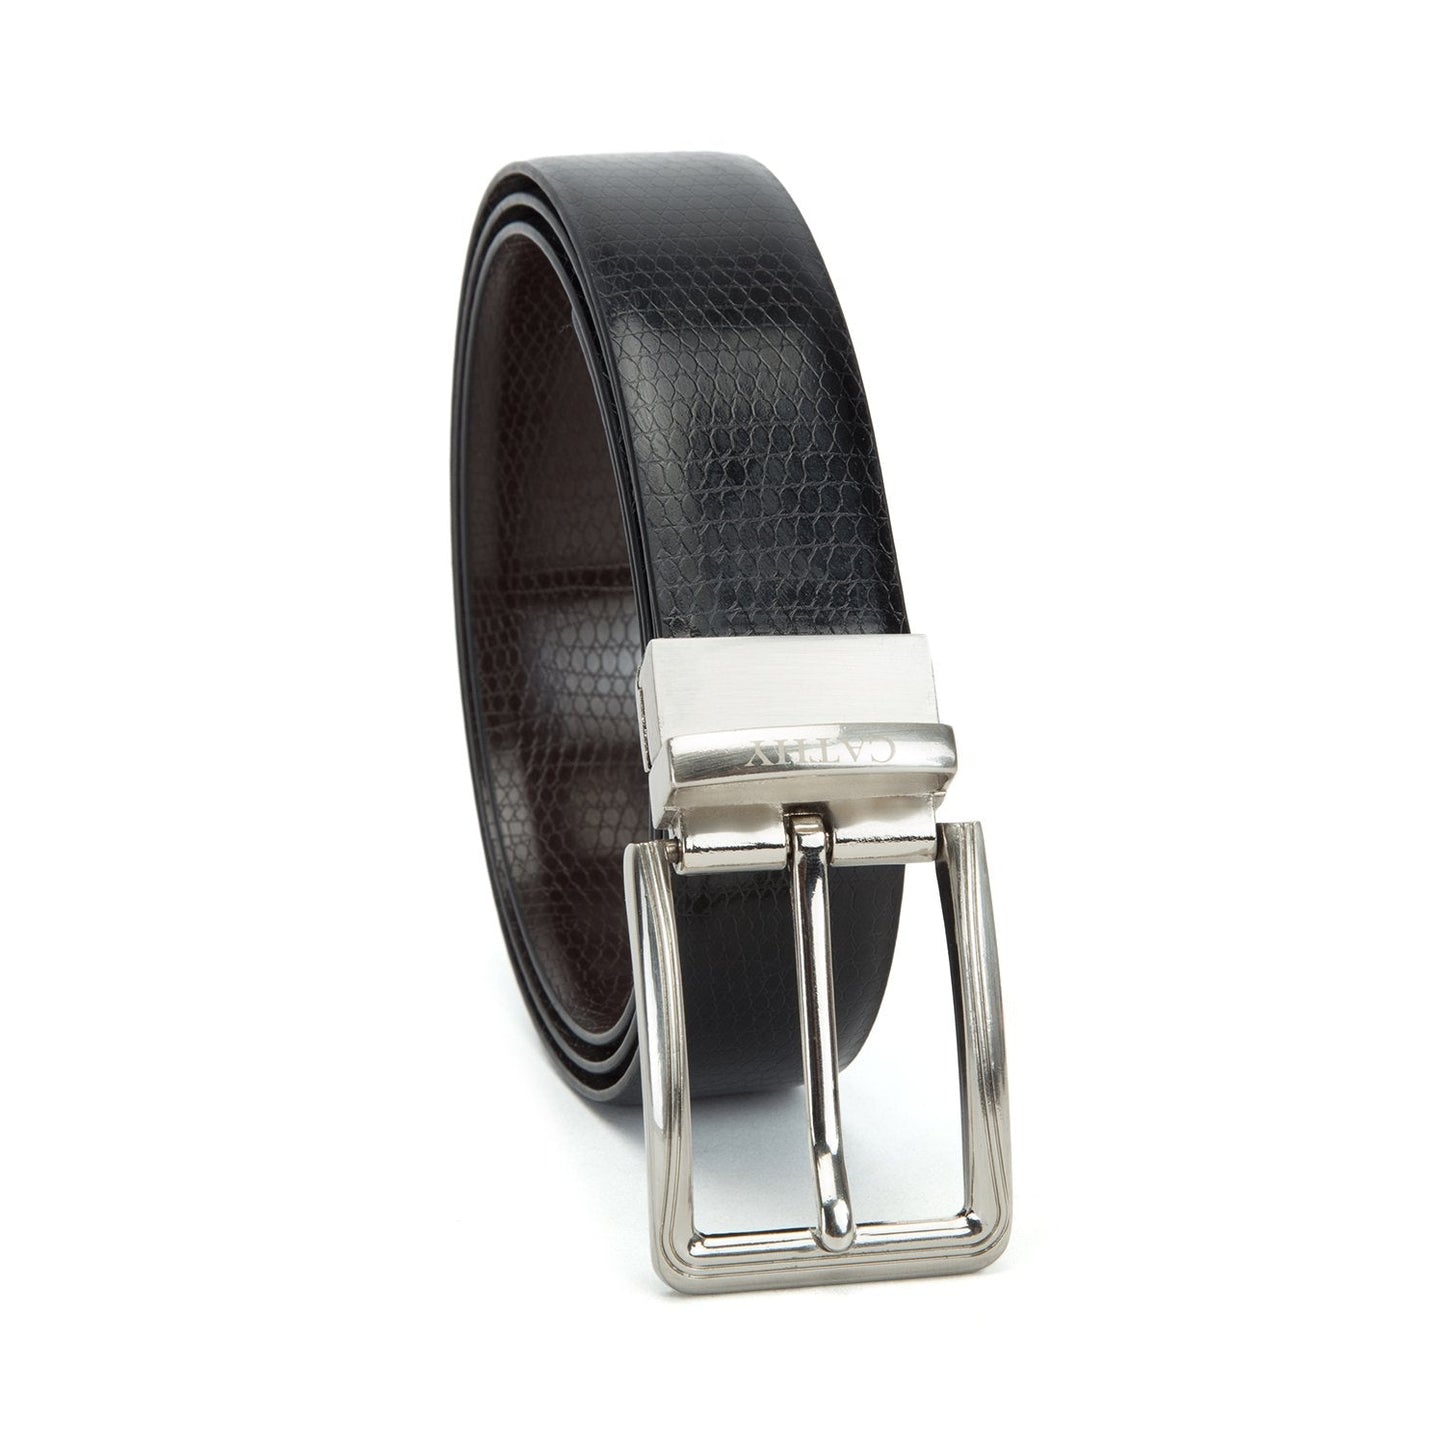 Cathy London Cut-to-Size Reversible  PU Leather Belt